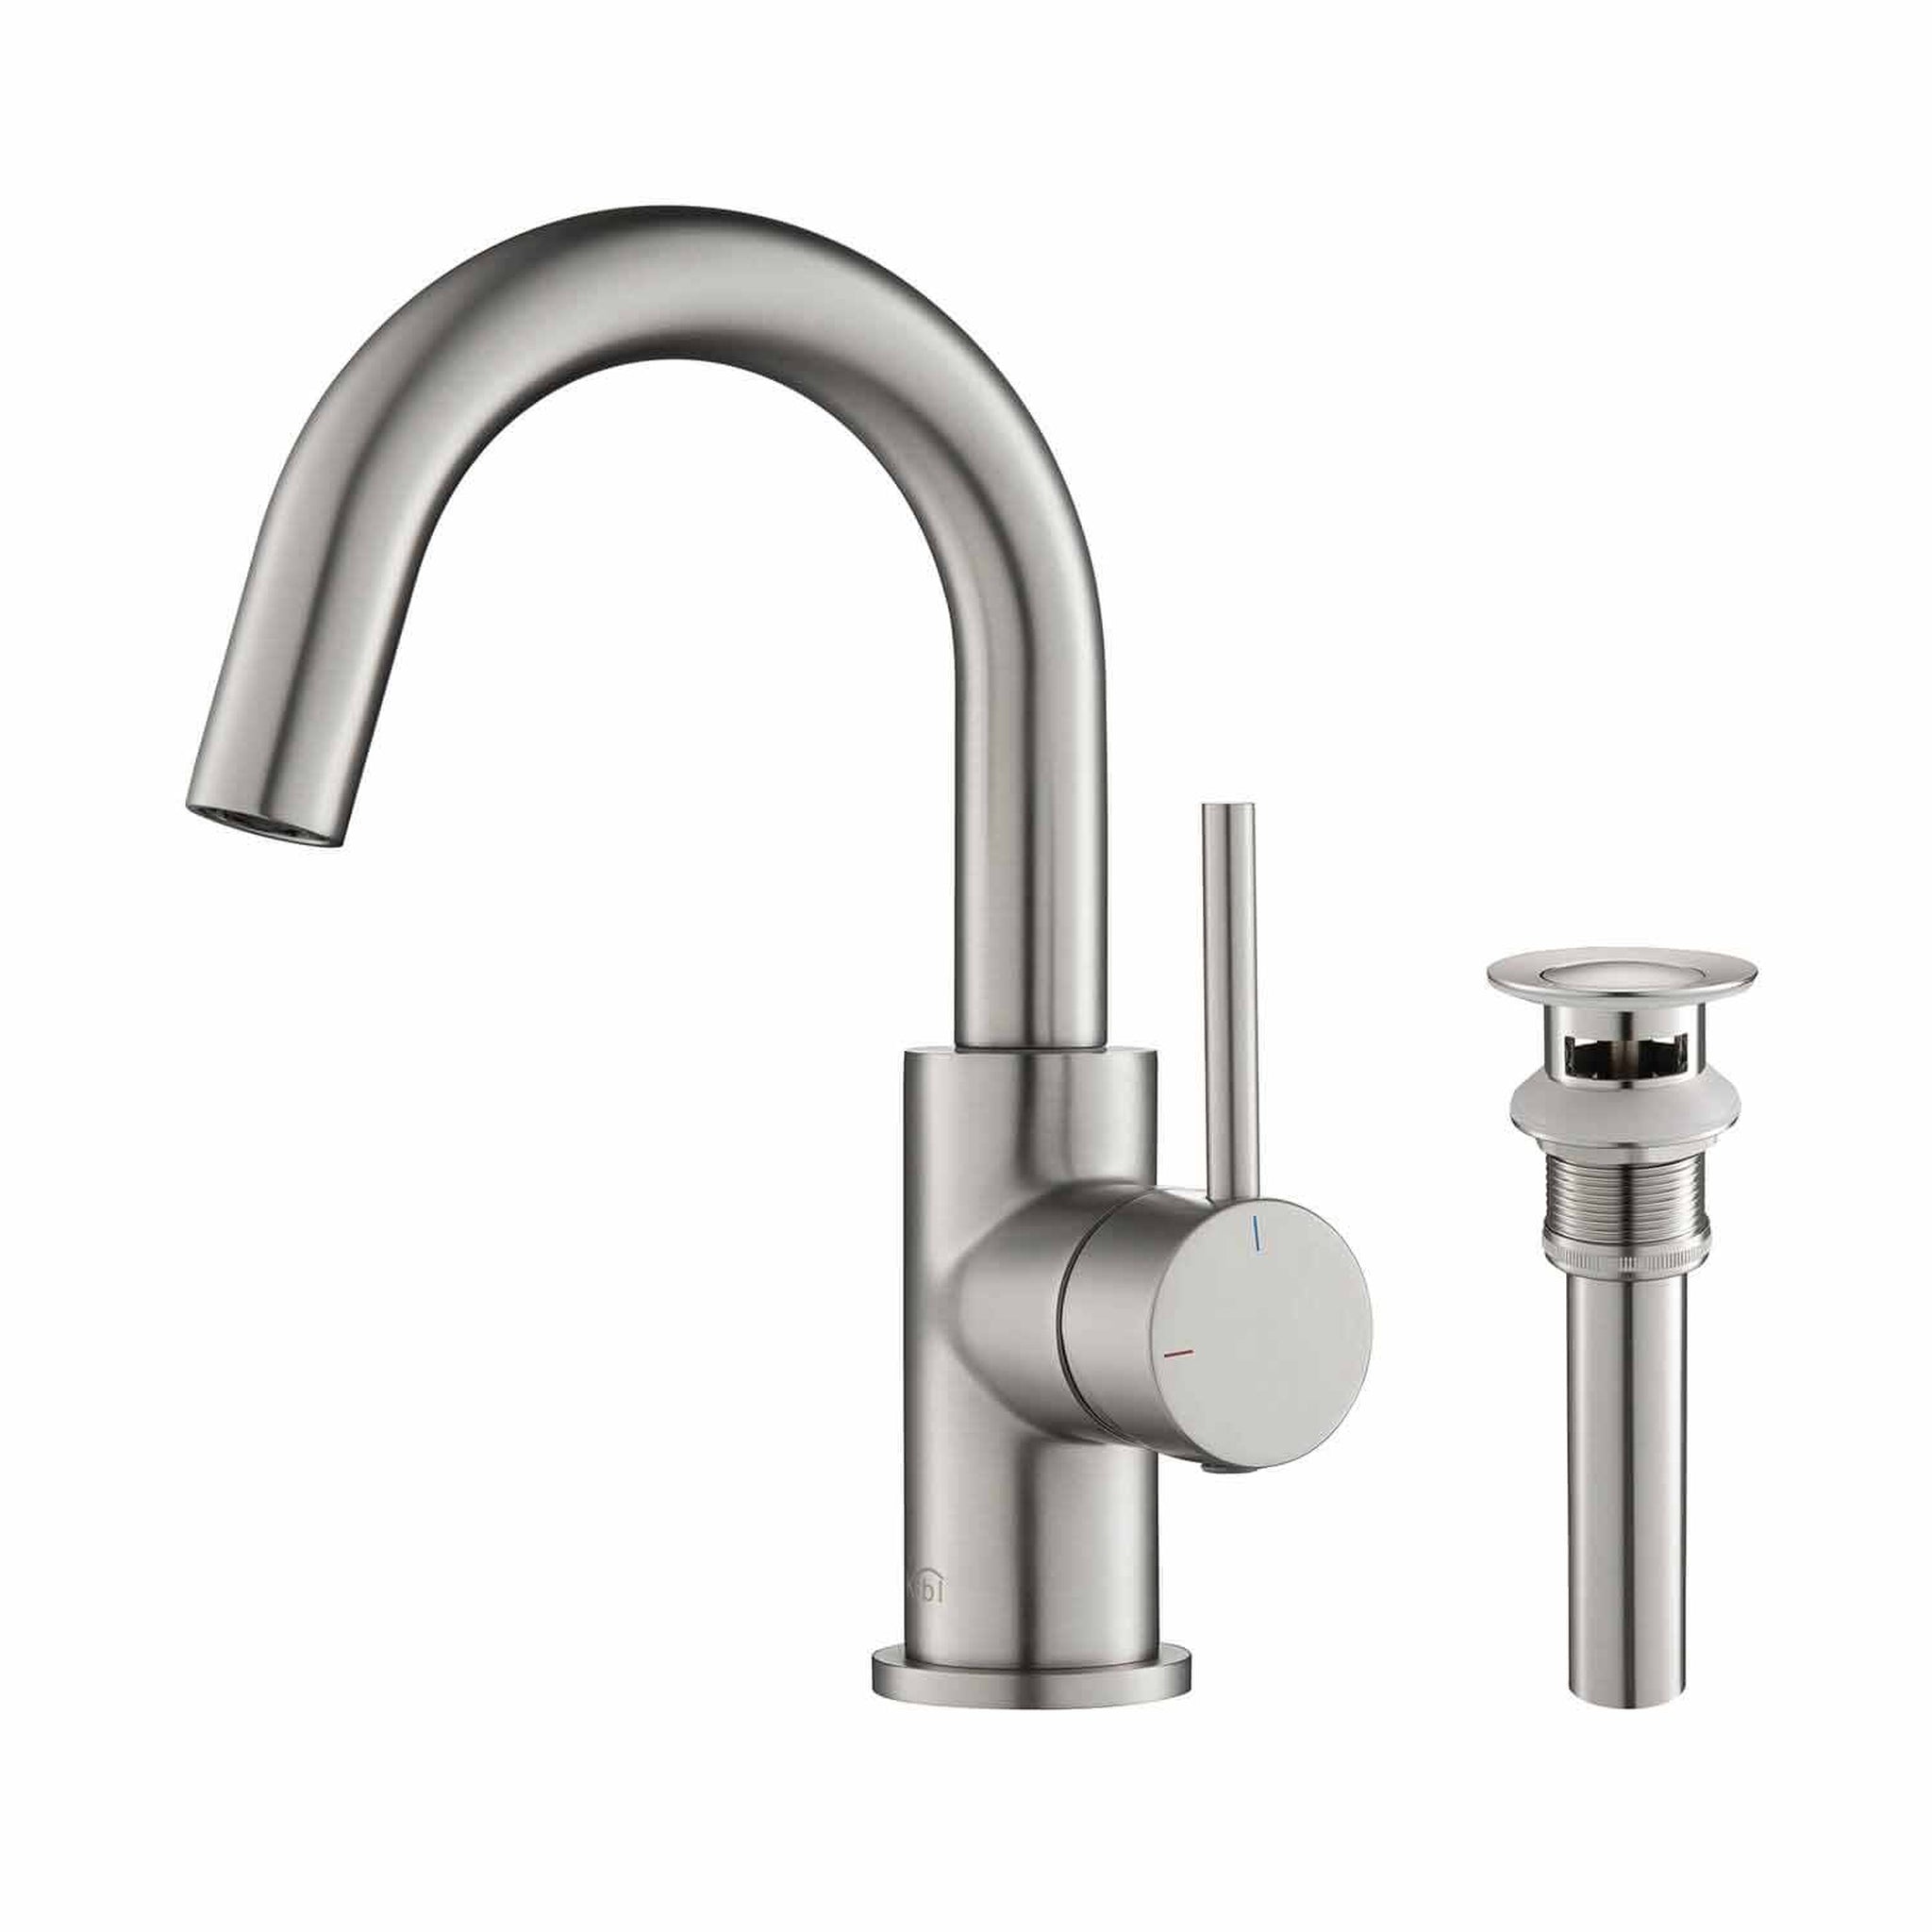 KIBI, KIBI Circular High-Arc Single Handle Brushed Nickel Solid Brass Bathroom Sink Faucet With Pop-Up Drain Stopper Small Cover With Overflow